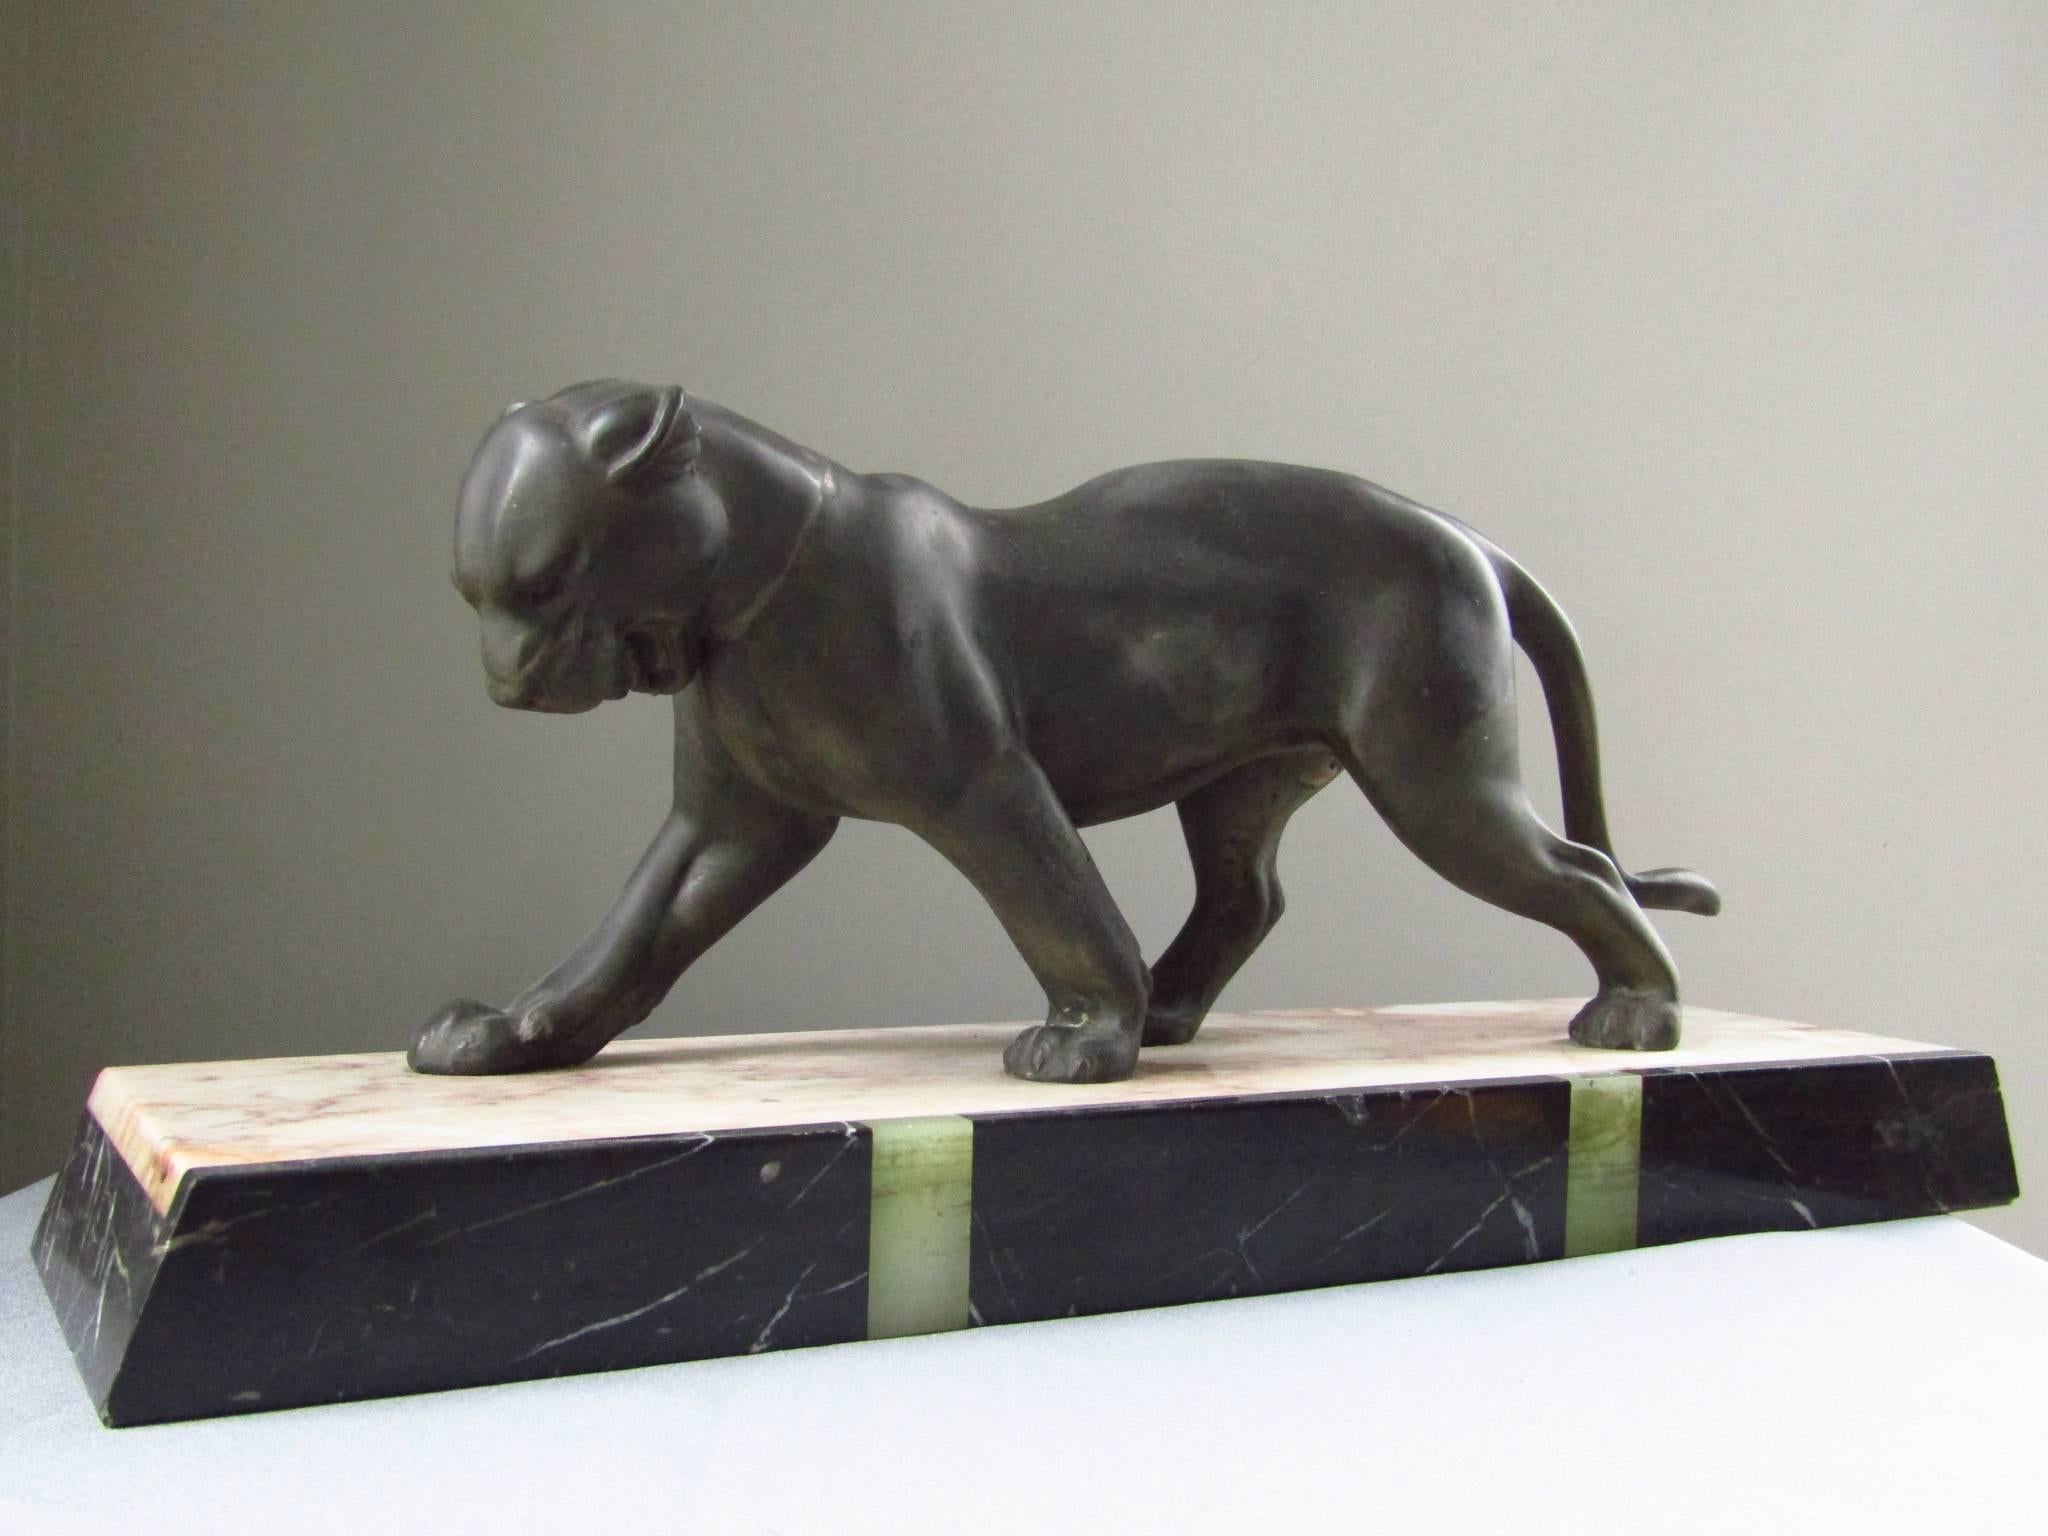 Art Deco walking panther sculpture on multi-color marble base, France, 1935 made of patinated regule.

Worldwide free shipping of this item!